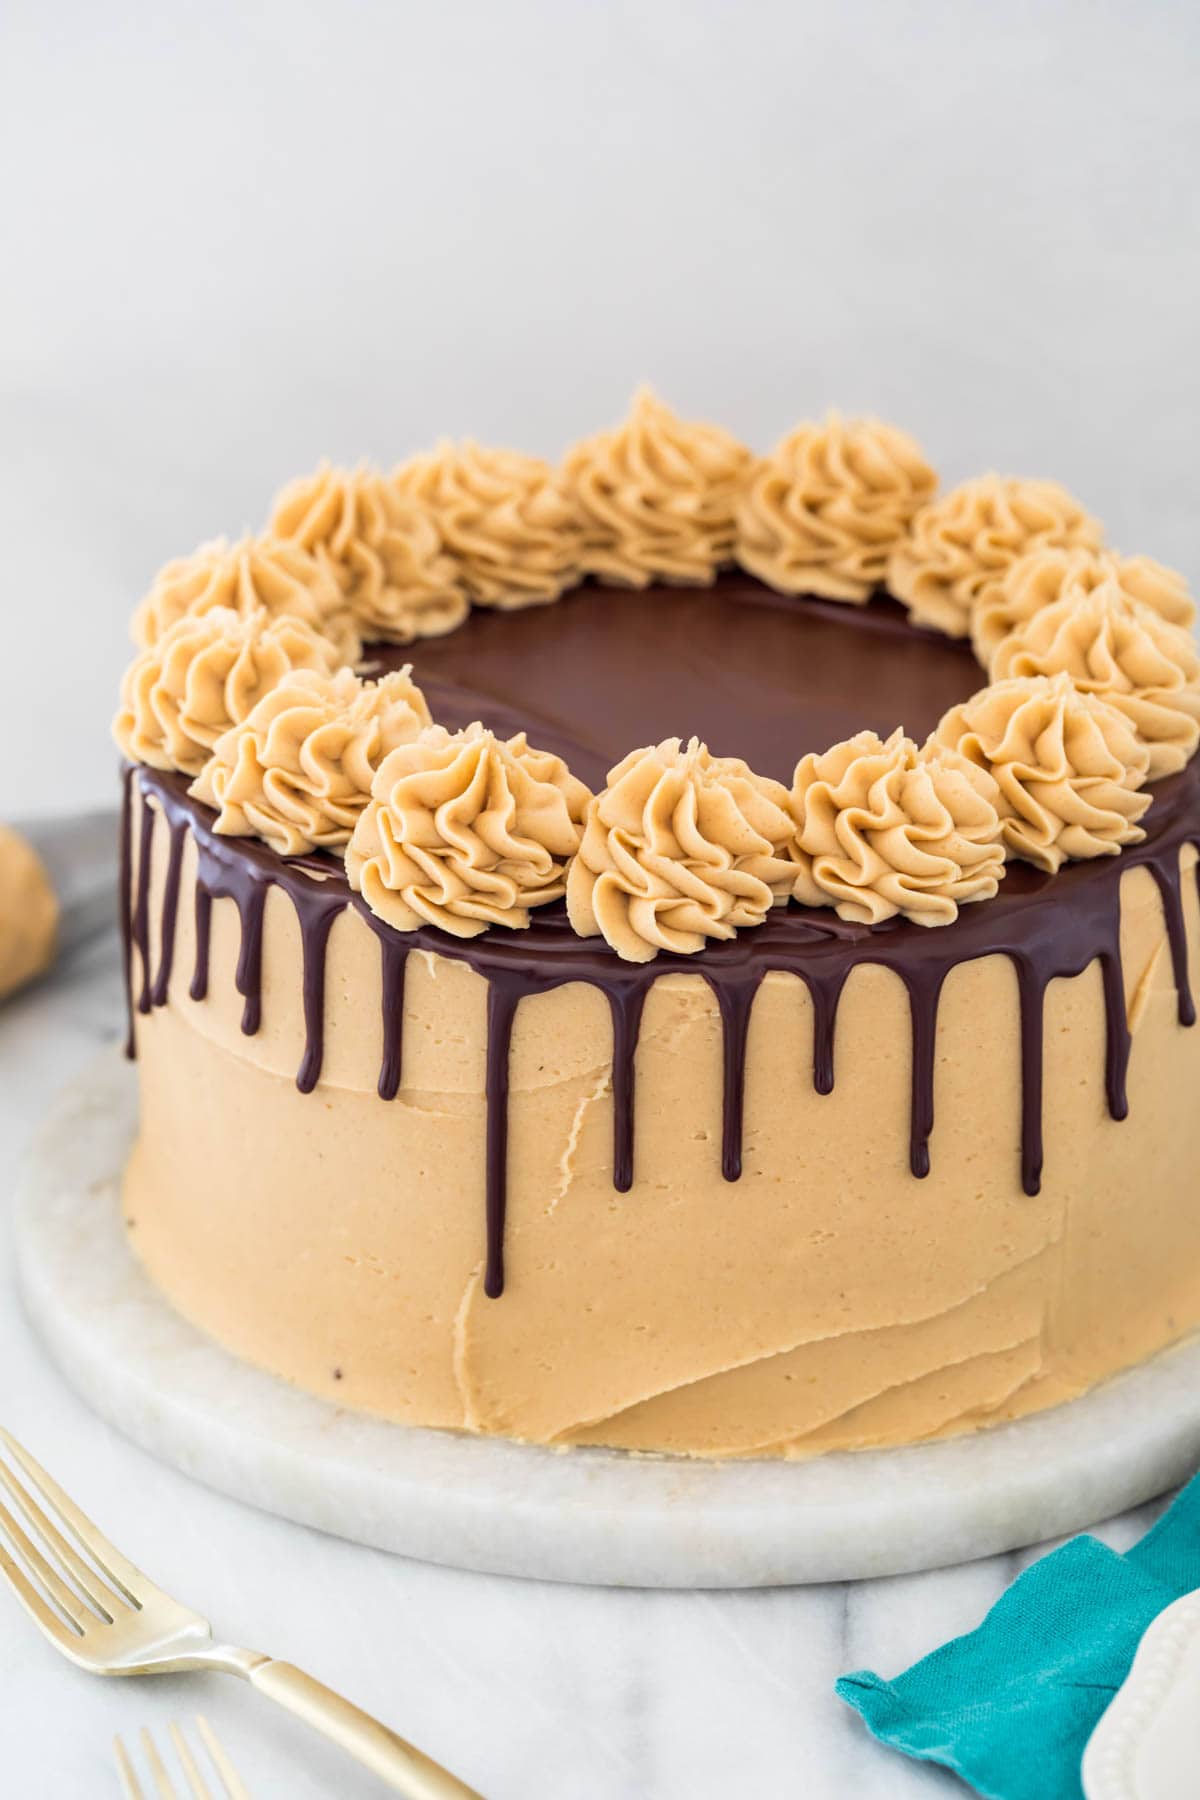 peanut butter chocolate cake frosted with peanut butter icing topped with chocolate ganache drips and a perimeter of icing swirls